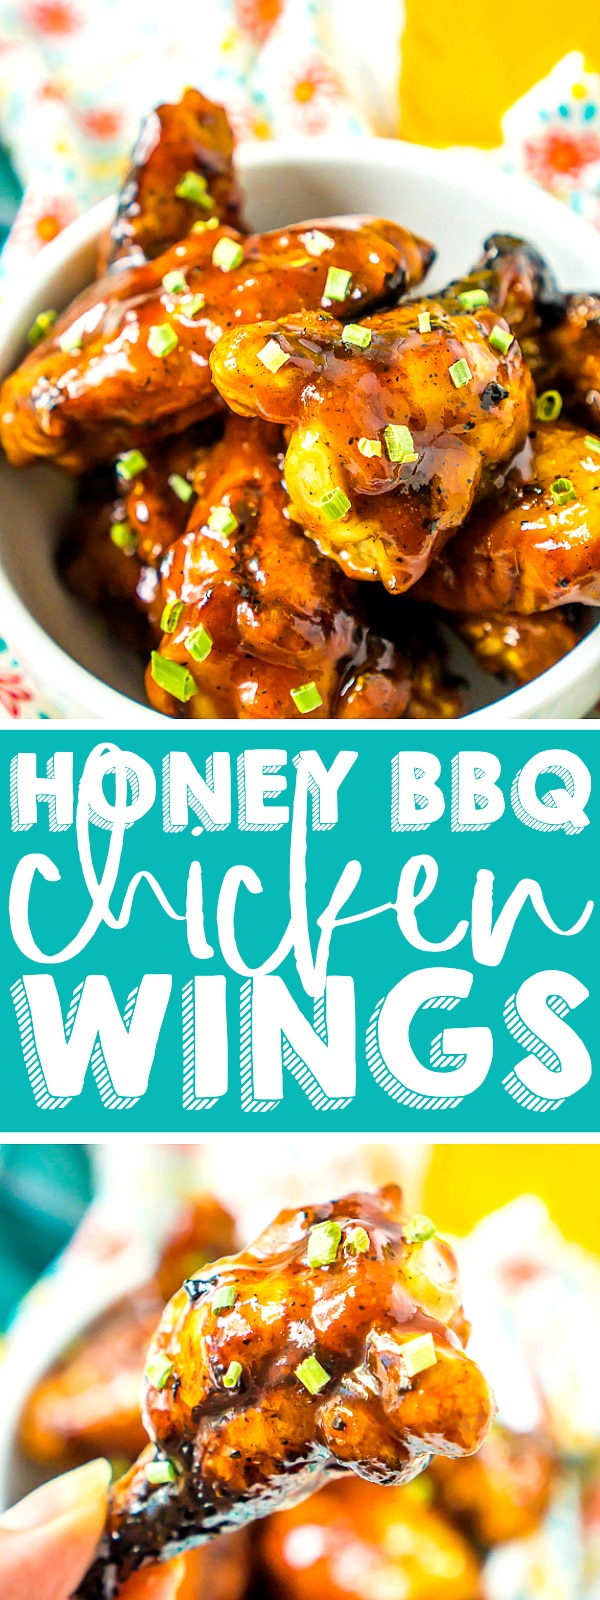 This sweet and smokey Honey BBQ Chicken Wings sauce will become an instant favorite for everyone in your family! Every single bite is packed with big flavor with the tiniest hint of some spice!  | THE LOVE NERDS #chickenwingsaucerecipe #chickenwings #grilledchickenwings #bakedchickenwings